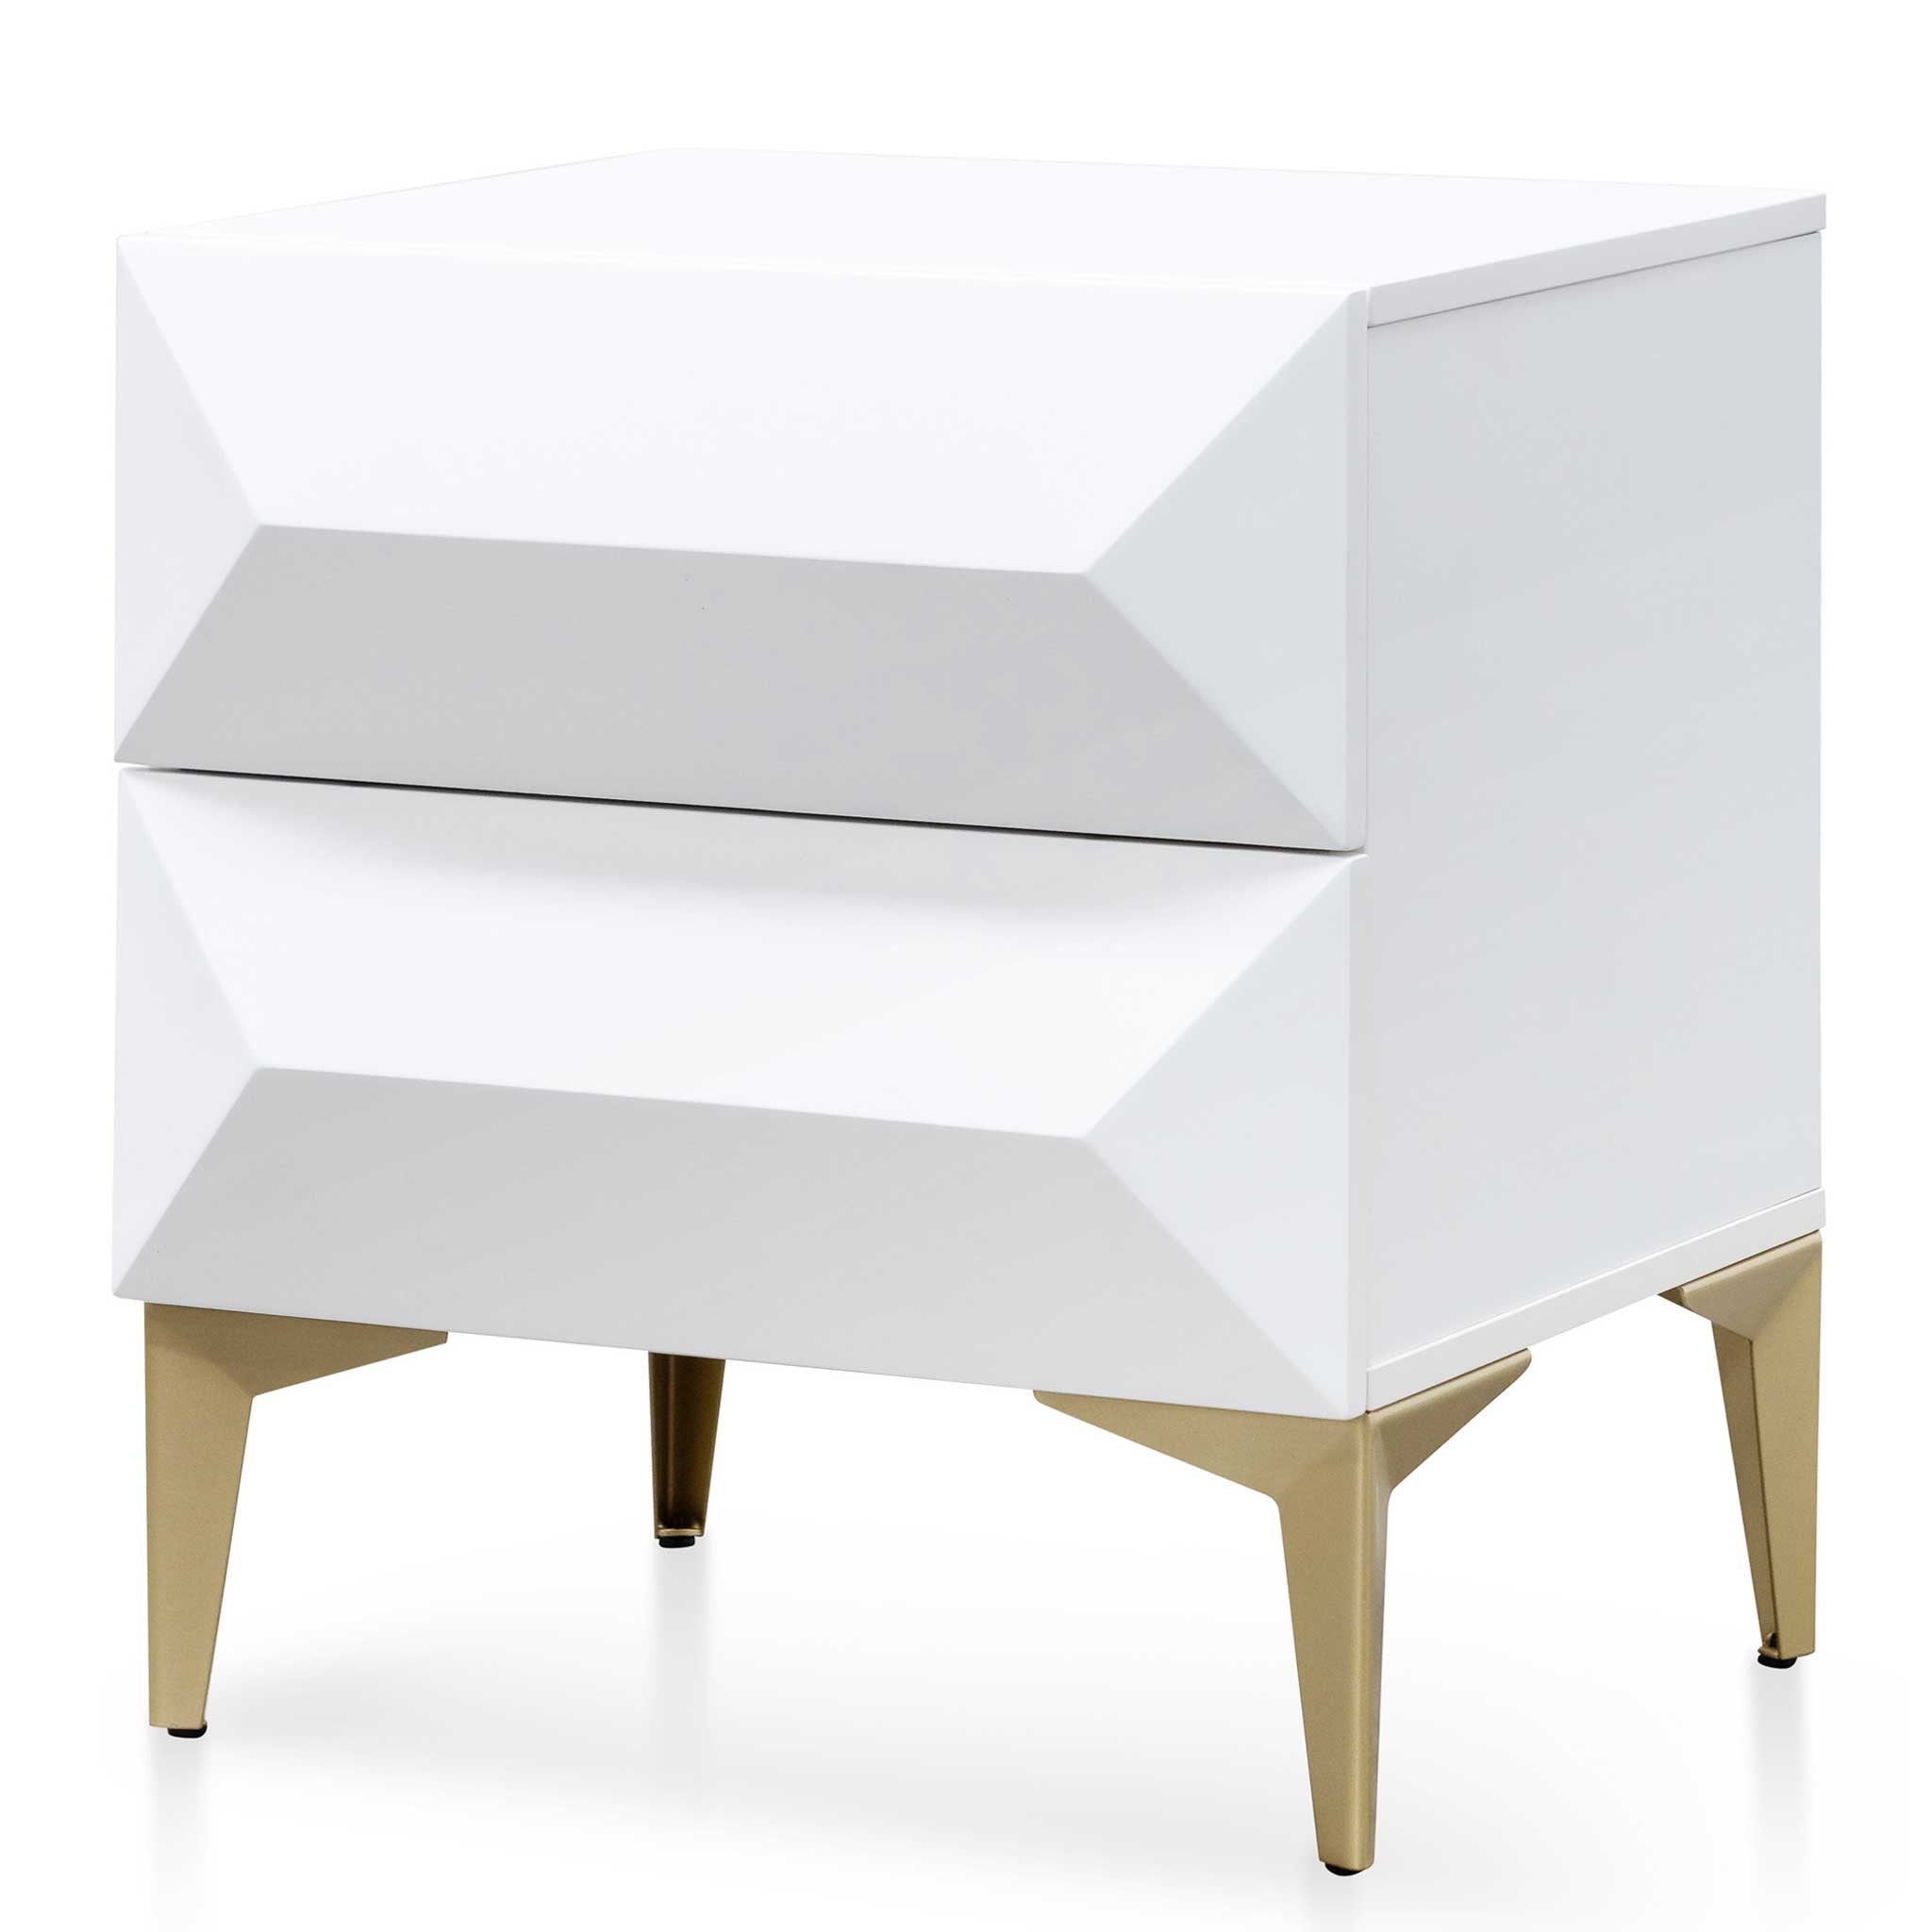 CST6410-IG Wooden Side Table – White with Gold Legs